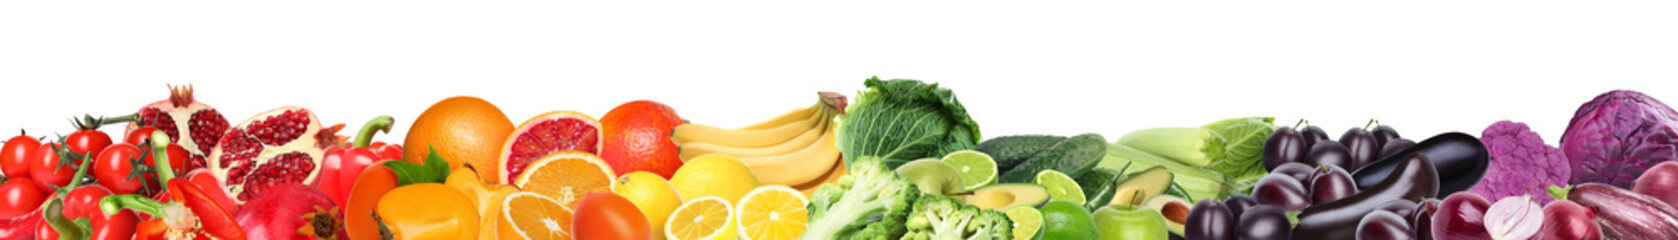 Many different fresh fruits and vegetables on white background. Banner design